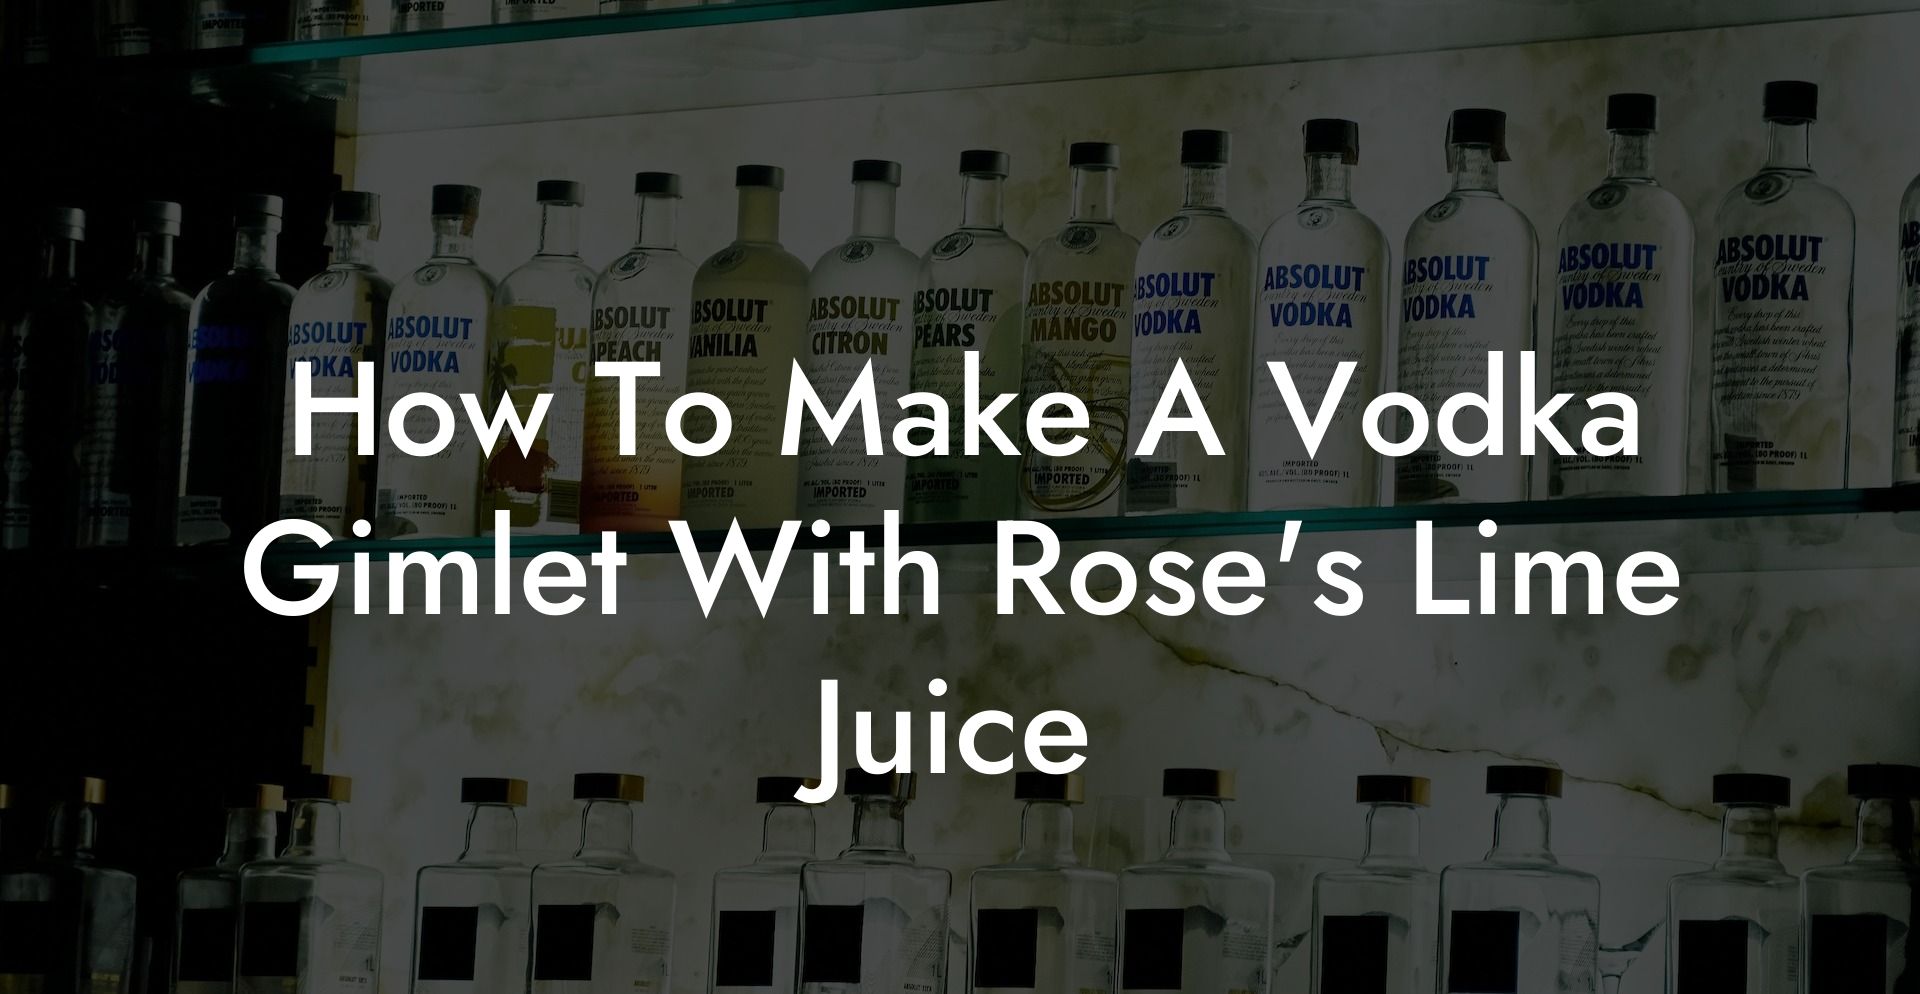 How To Make A Vodka Gimlet With Rose's Lime Juice